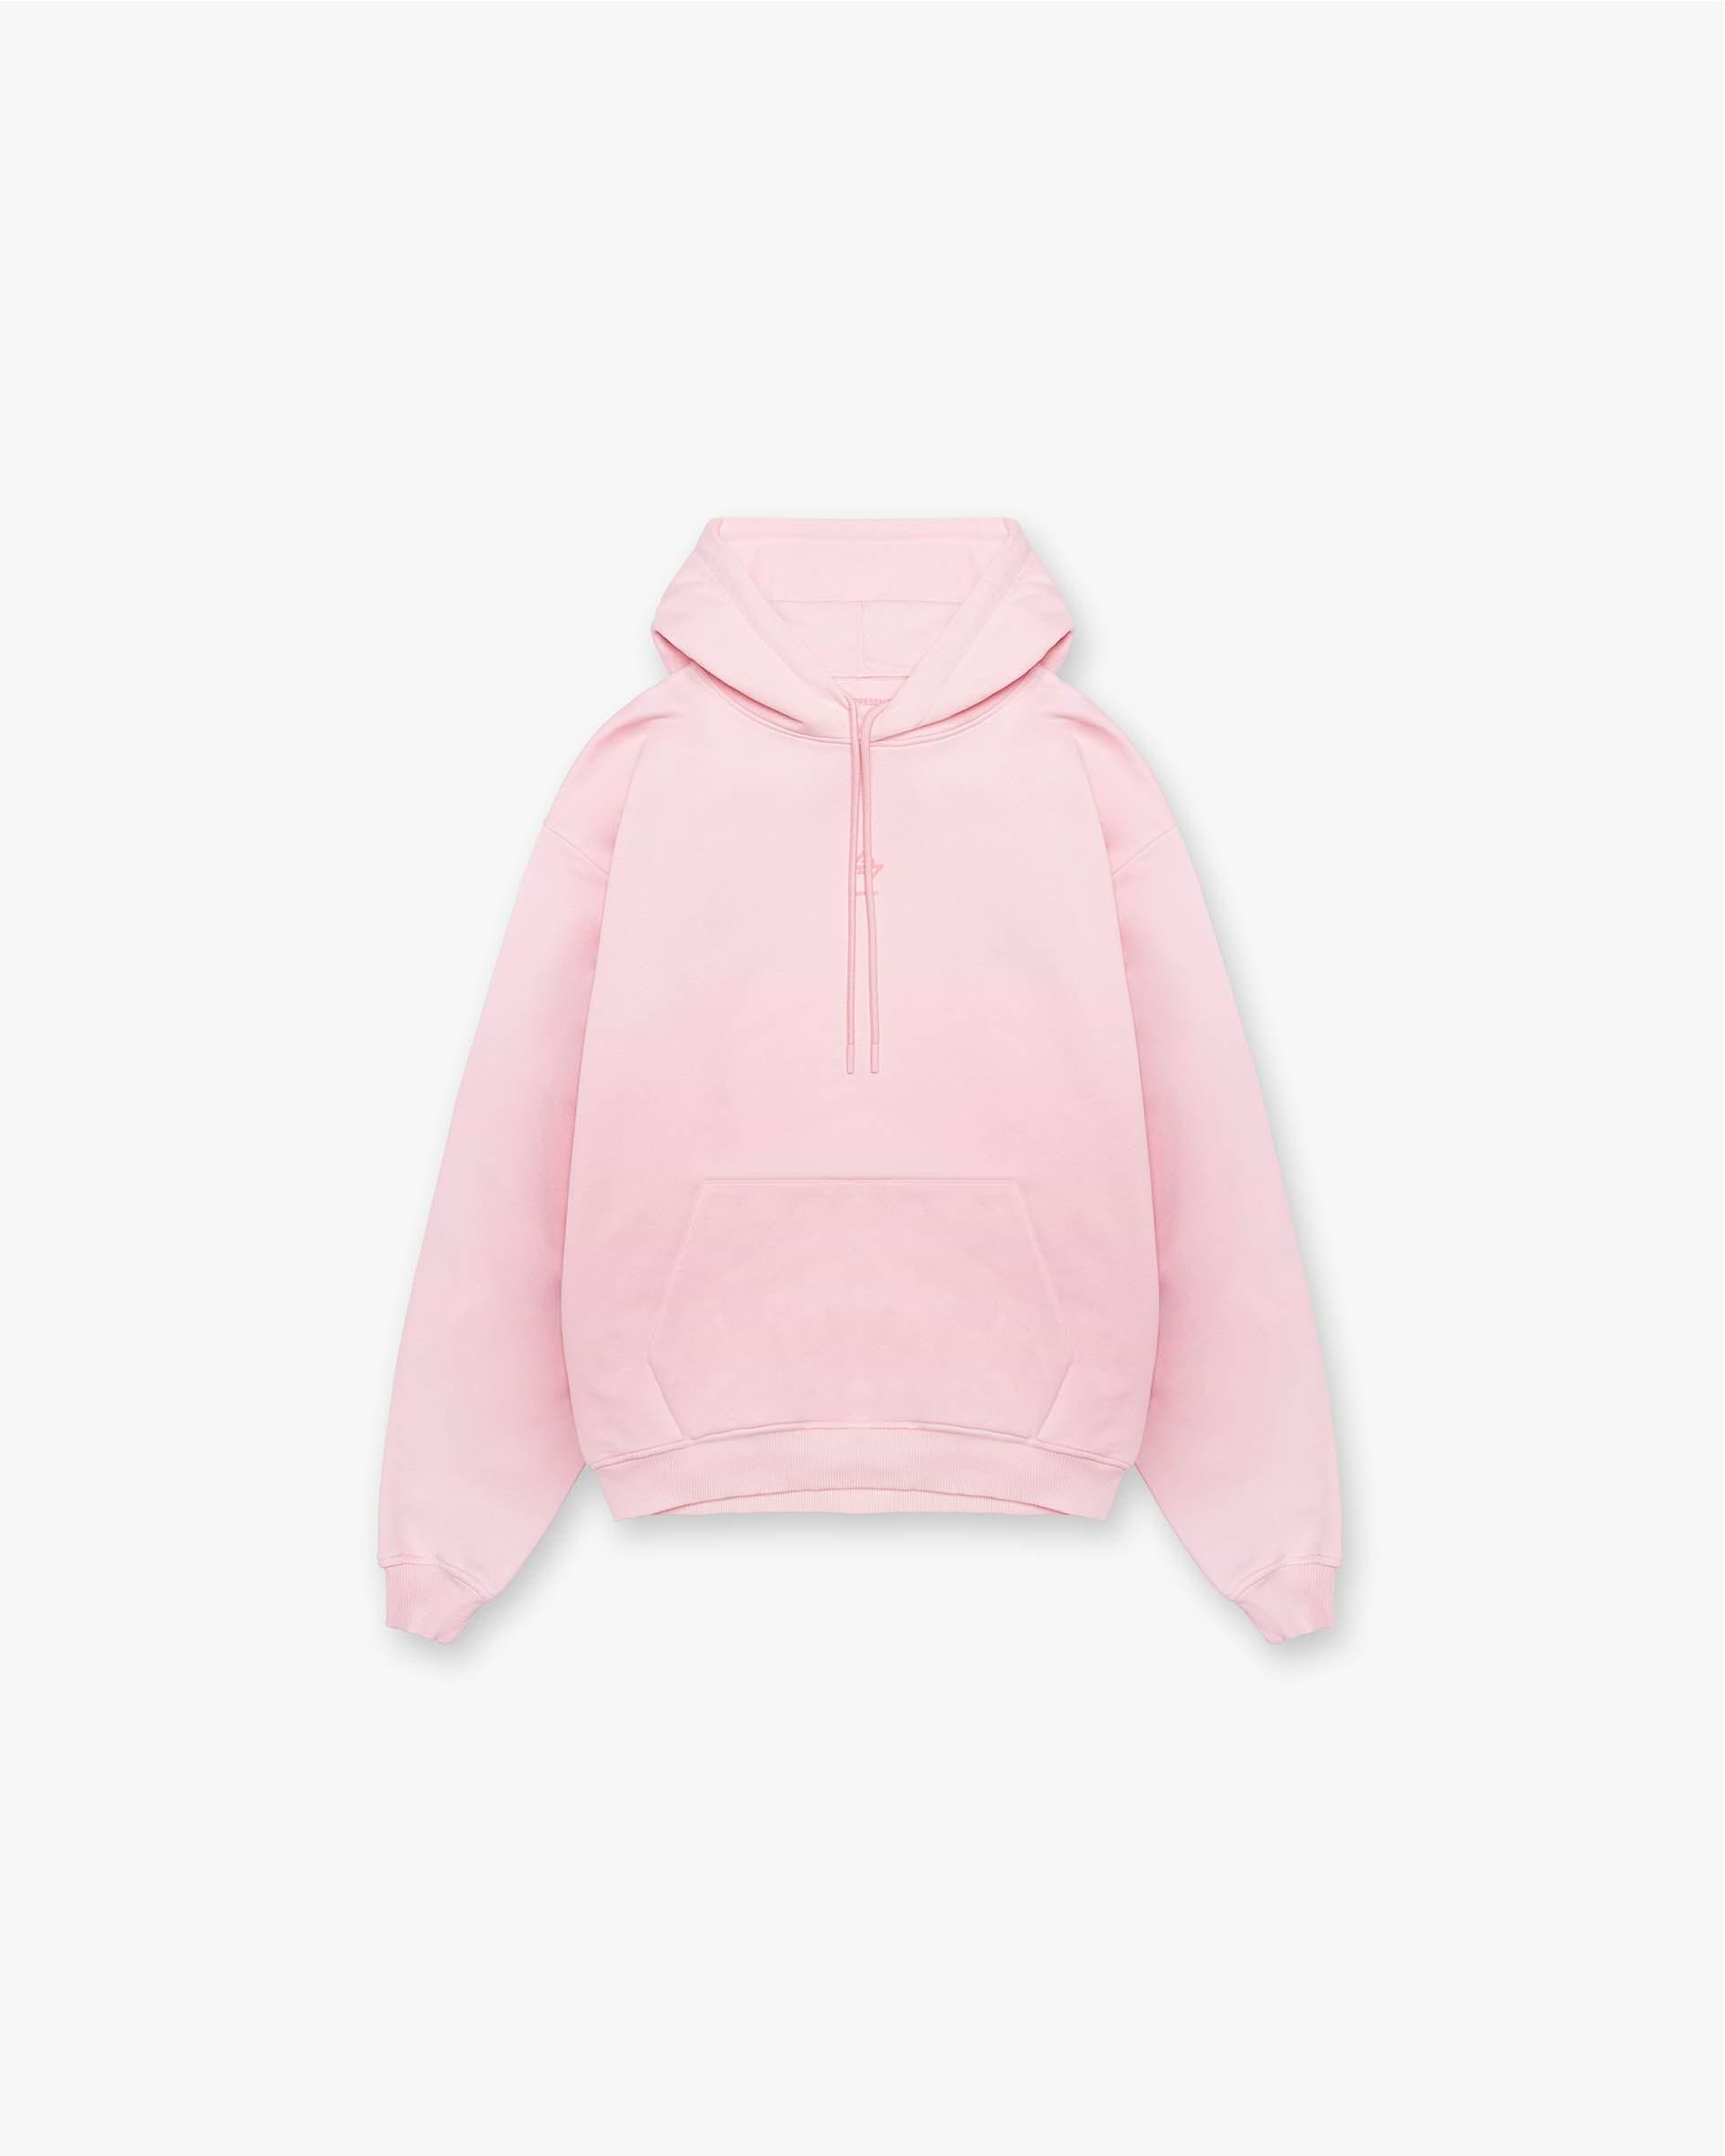 London 247 Oversized Hoodie - Candy Pink